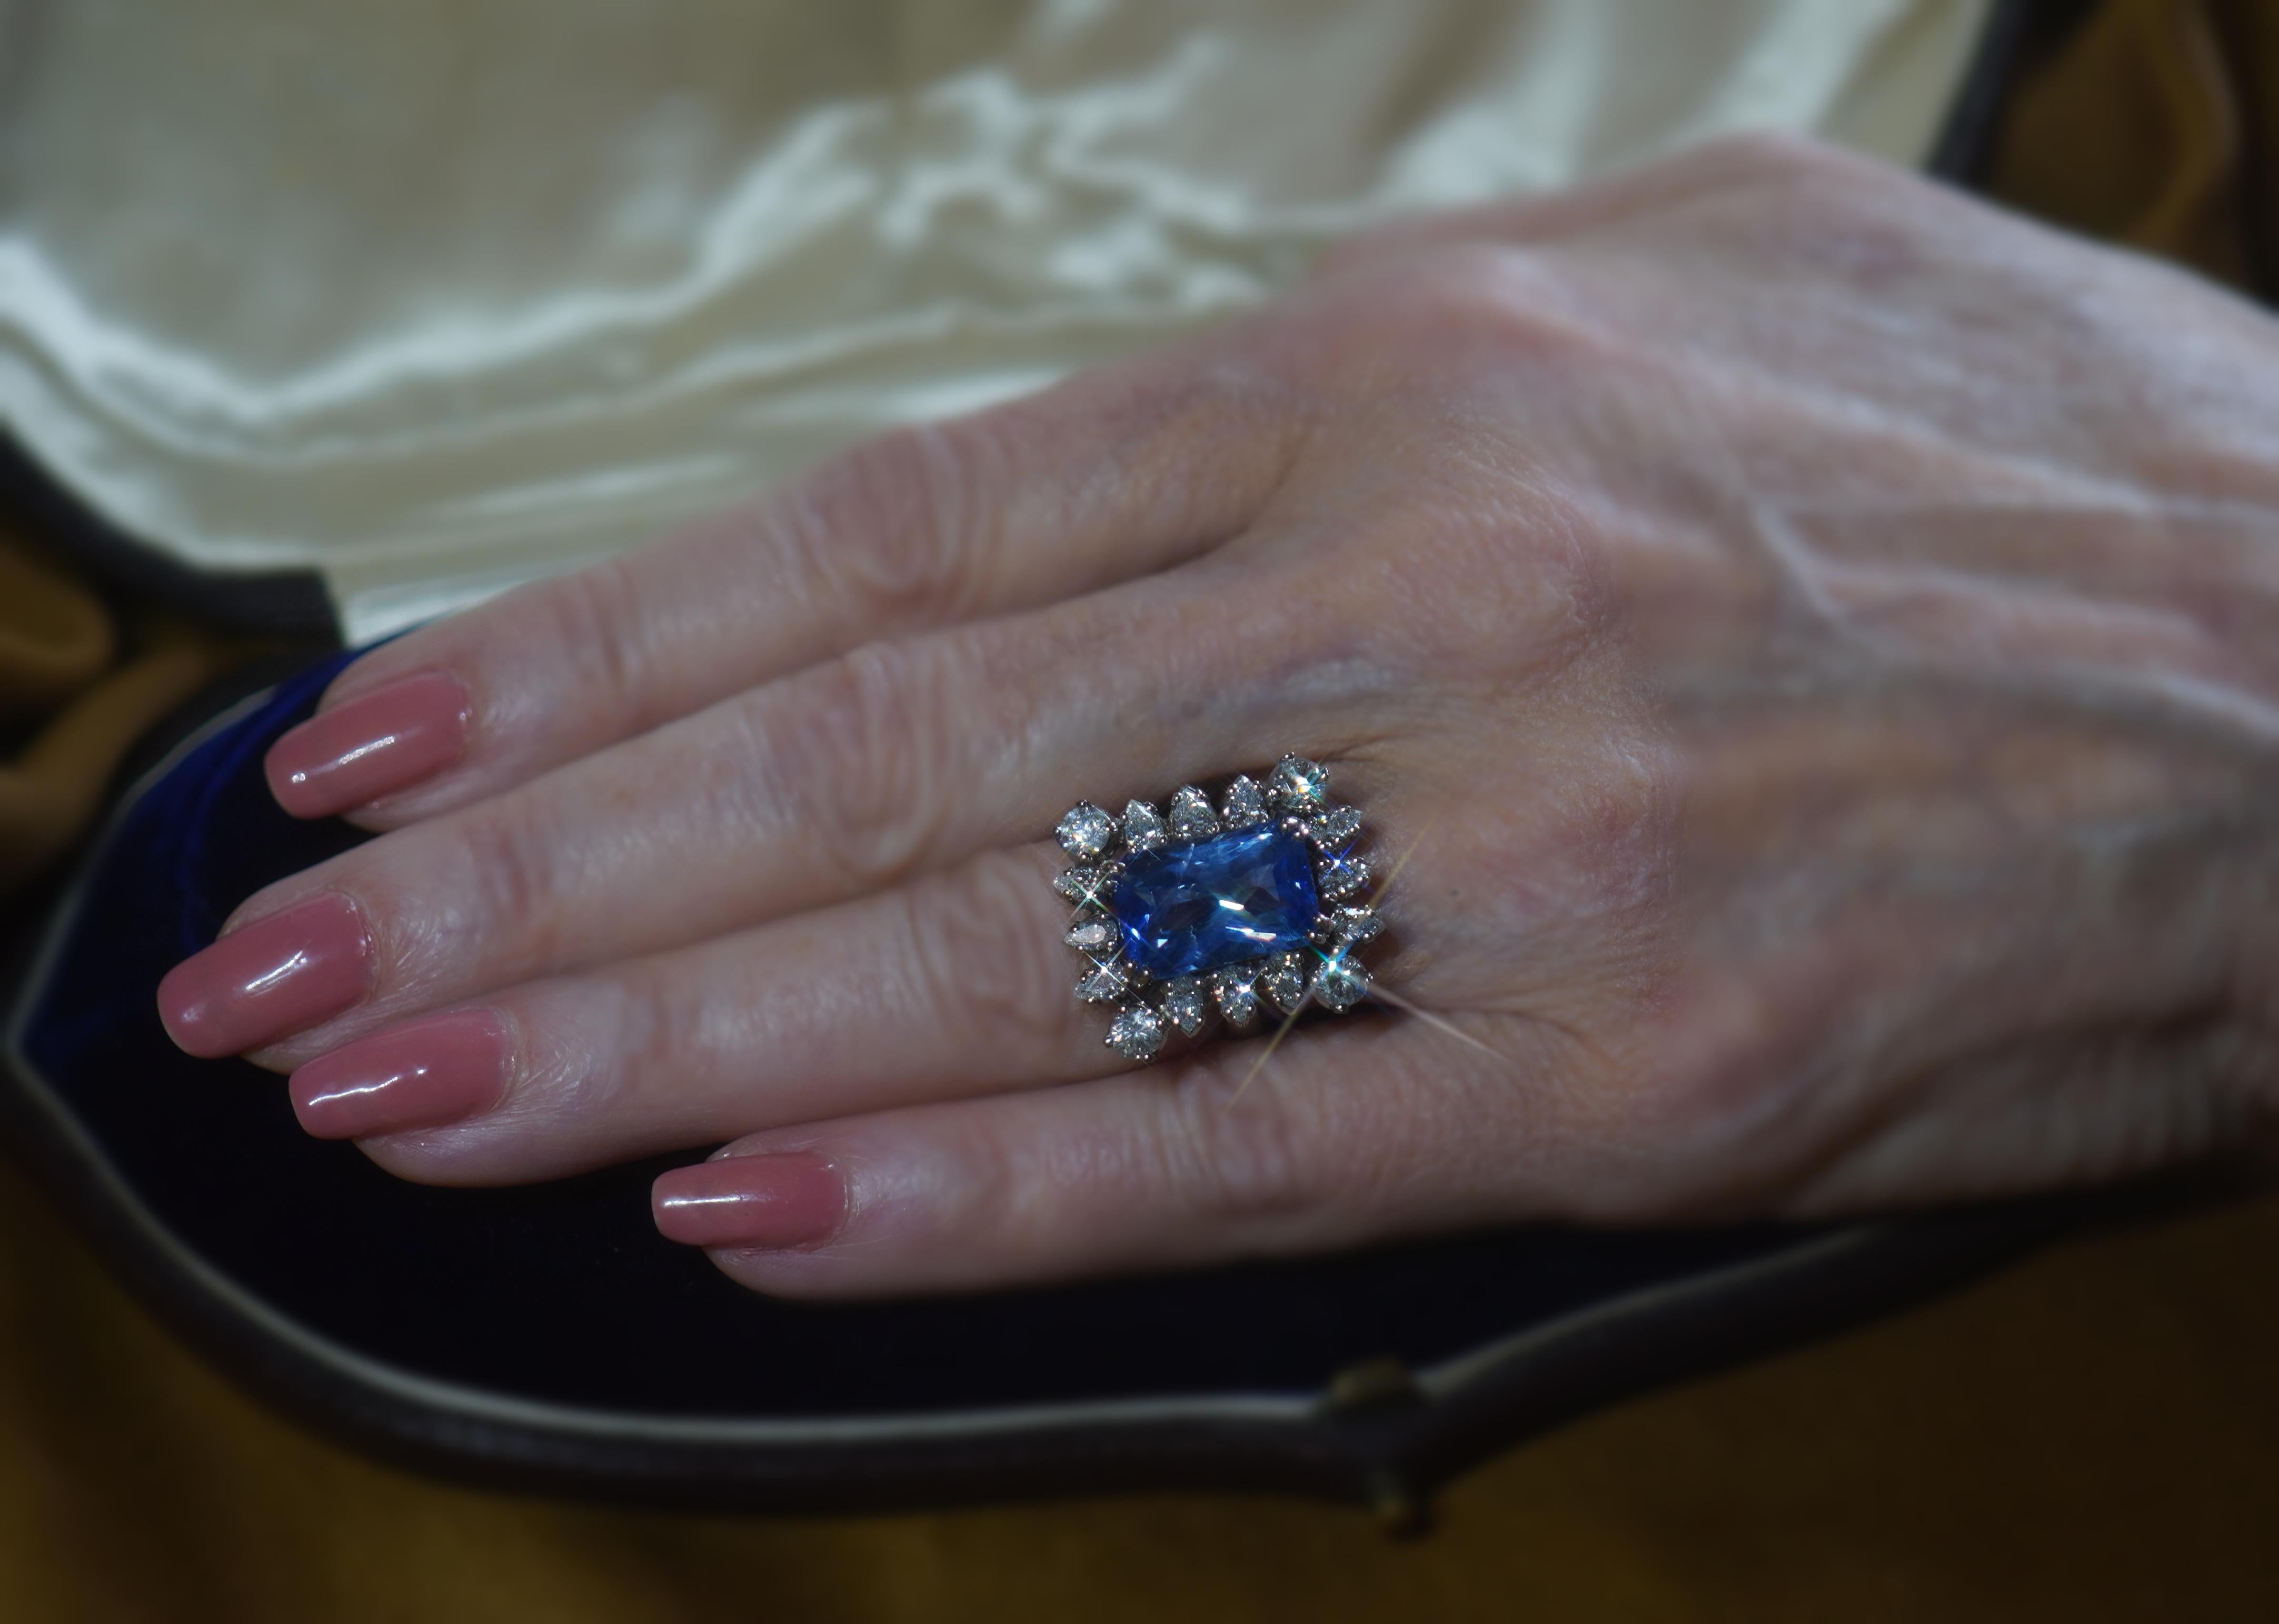 Old South Jewels proudly presents... BEST OF THE BEST... TIFFANY & CO HUGE ANTIQUE 15.60 CARAT UNHEATED SAPPHIRE RING!   GIA CERTIFIED PLATINUM HUGE NO HEAT SAPPHIRE DIAMOND VINTAGE RING & BOX!   GIANT 11.80 CARAT BRILLIANT ROYAL BLUE GIA CERTIFIED